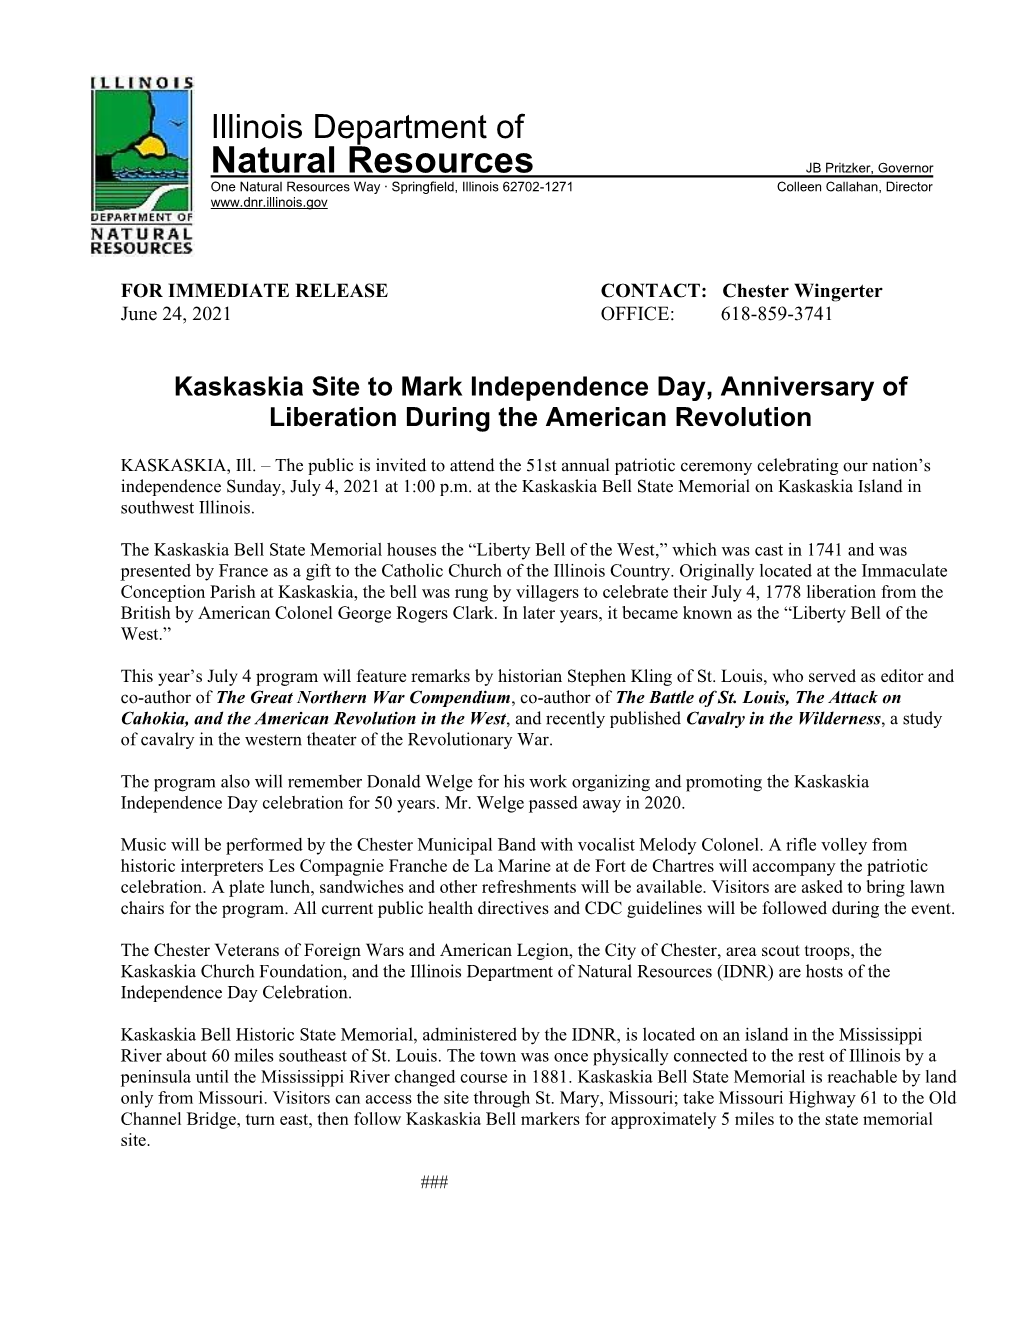 Kaskaskia Site to Mark Independence Day, Anniversary of Liberation During the American Revolution